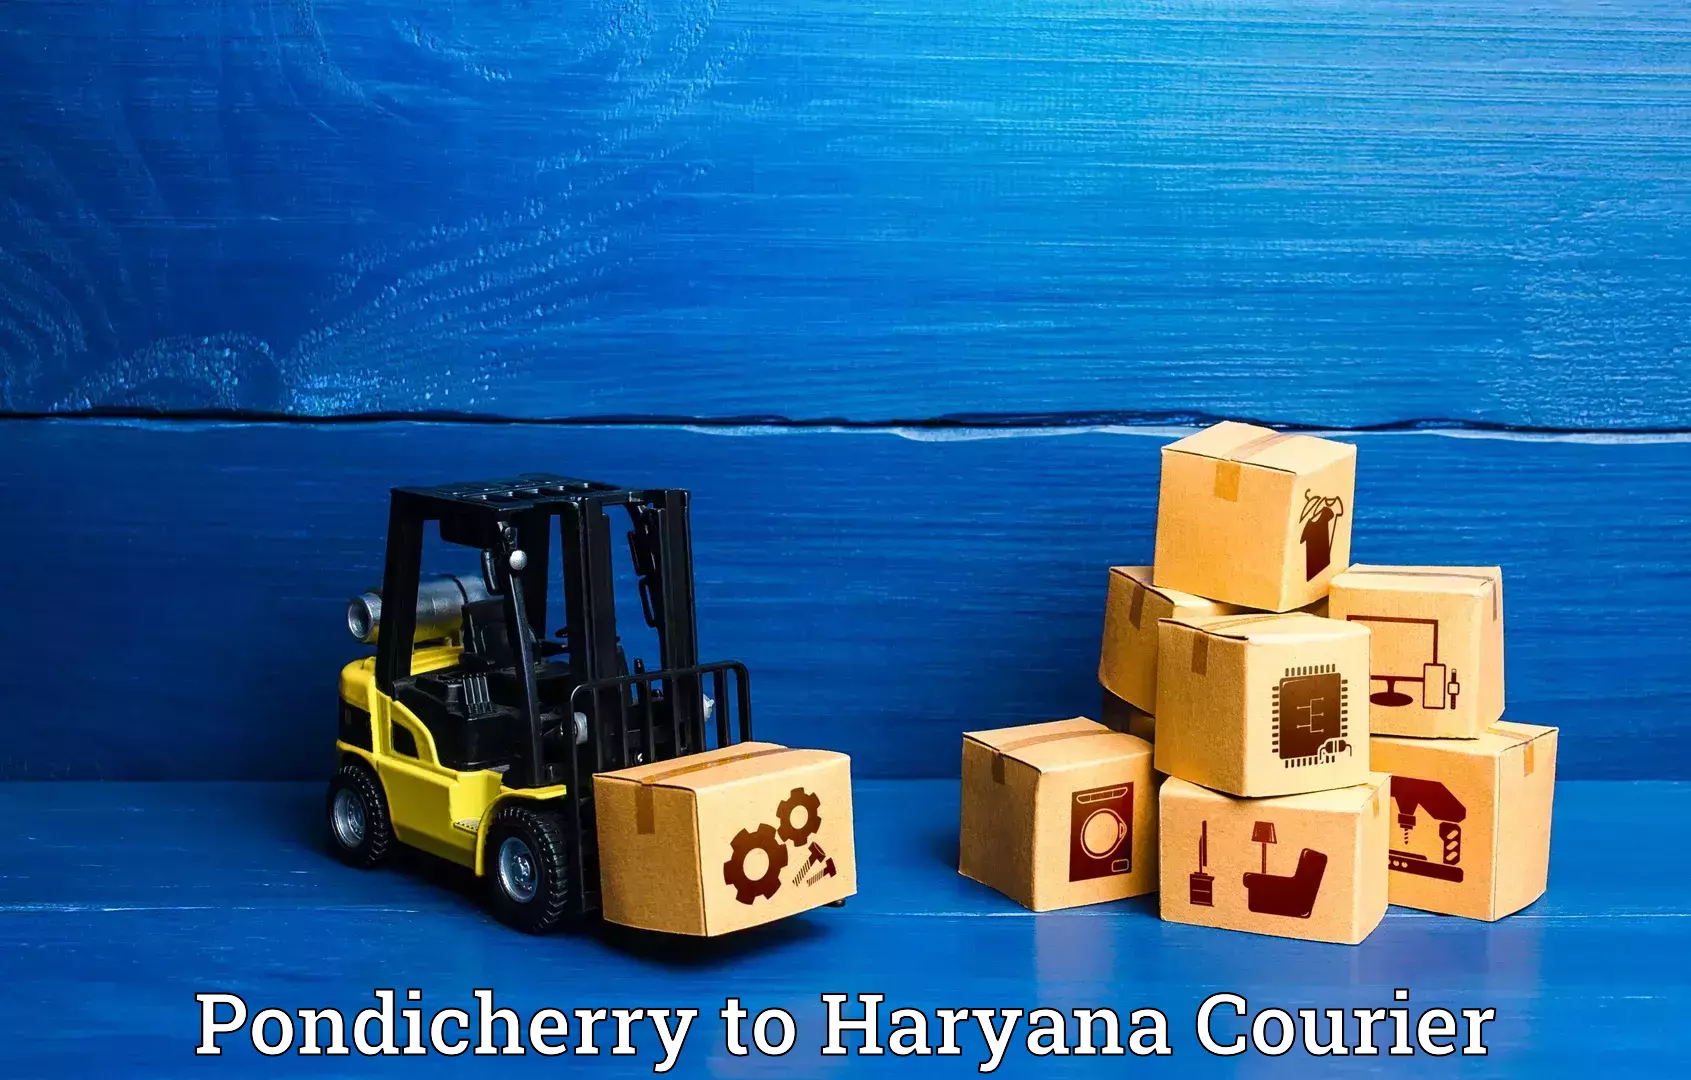 Business luggage transport in Pondicherry to NCR Haryana